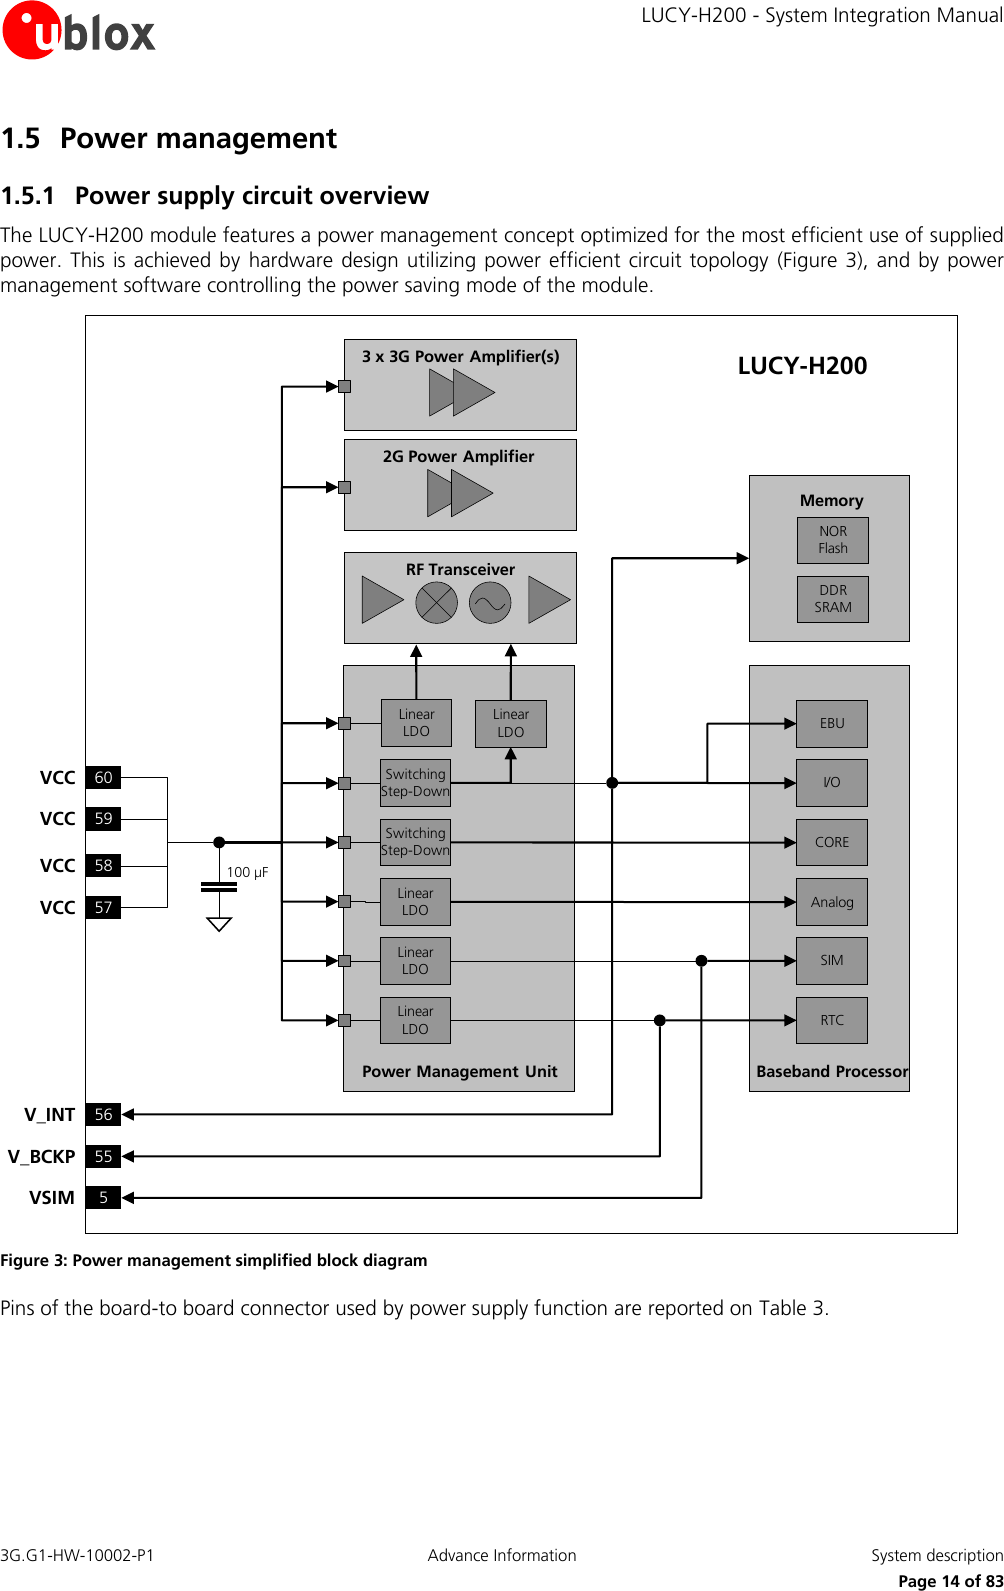     LUCY-H200 - System Integration Manual 3G.G1-HW-10002-P1  Advance Information  System description      Page 14 of 83 1.5 Power management 1.5.1 Power supply circuit overview The LUCY-H200 module features a power management concept optimized for the most efficient use of supplied power. This is achieved by hardware  design utilizing power efficient circuit topology  (Figure 3), and by power management software controlling the power saving mode of the module. Baseband Processor2G Power AmplifierSwitching Step-DownLUCY-H200100 µF60VCC59VCC58VCC57VCC5VSIM55V_BCKP56V_INT3 x 3G Power Amplifier(s)Linear LDOLinear LDOSwitching Step-DownLinear LDOLinear LDOLinear LDOI/OEBUCOREAnalogSIMRTCNOR FlashDDR SRAMRF TransceiverMemoryPower Management  Unit Figure 3: Power management simplified block diagram Pins of the board-to board connector used by power supply function are reported on Table 3. 